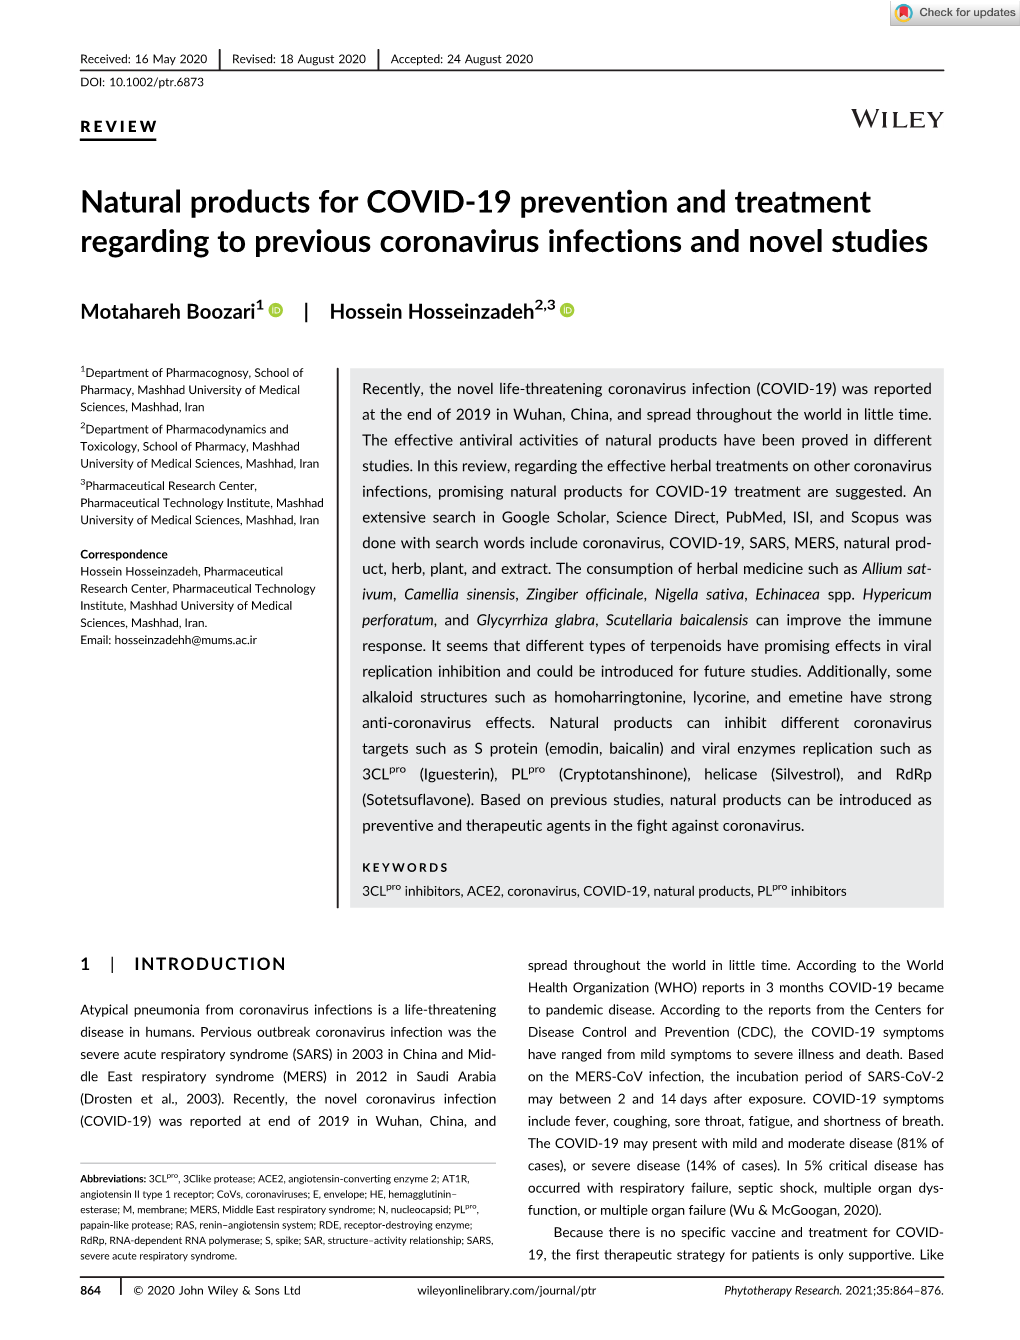 Natural Products for COVID‐19 Prevention and Treatment Regarding